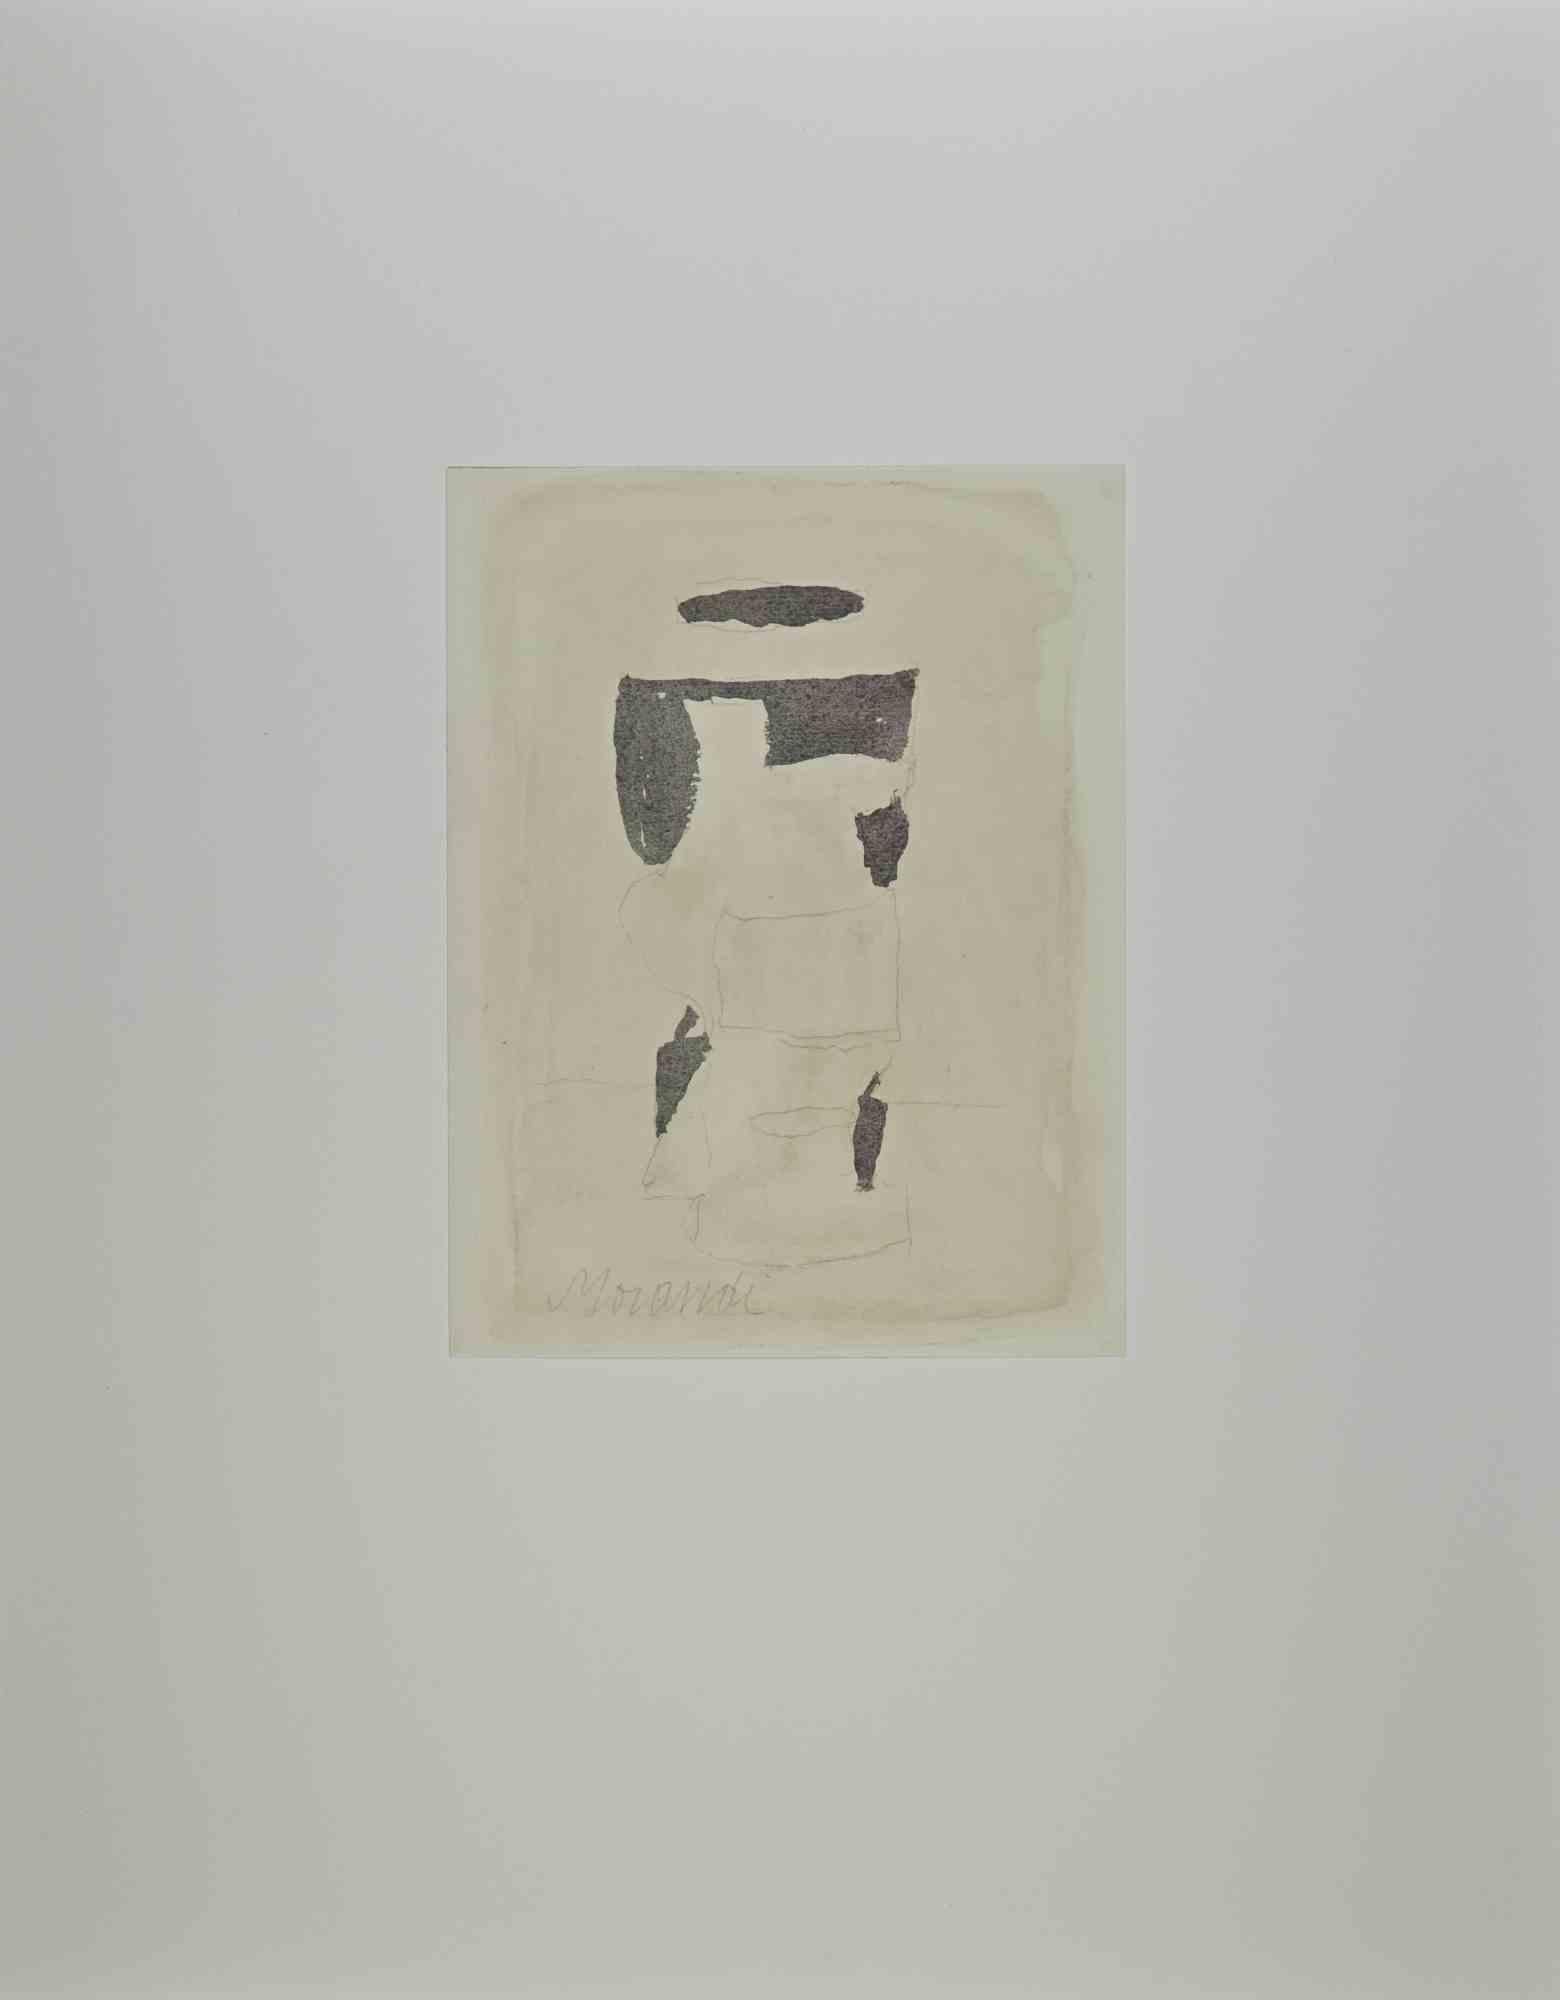 Still life is a vintage offset print, reproducing the original watercolor by Giorgio Morandi.

Signature and date by the artist is perfectly reproduced on plate. Image Dimensions: 17.5 x 28 cm

From the volume "L'Opera grafica di Giorgio Morandi",